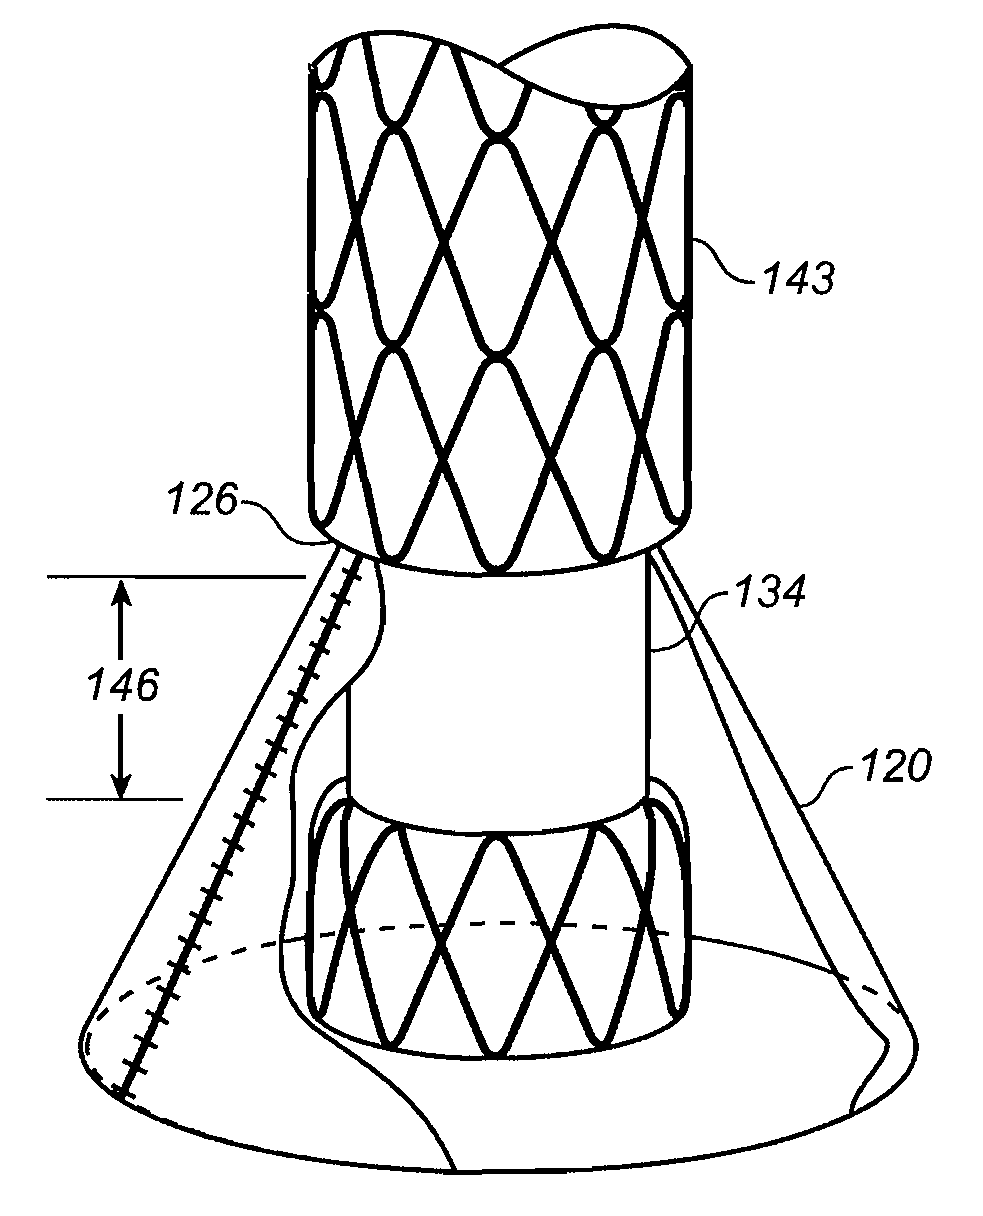 Mobile external coupling with internal sealing cuff for branch vessel connection